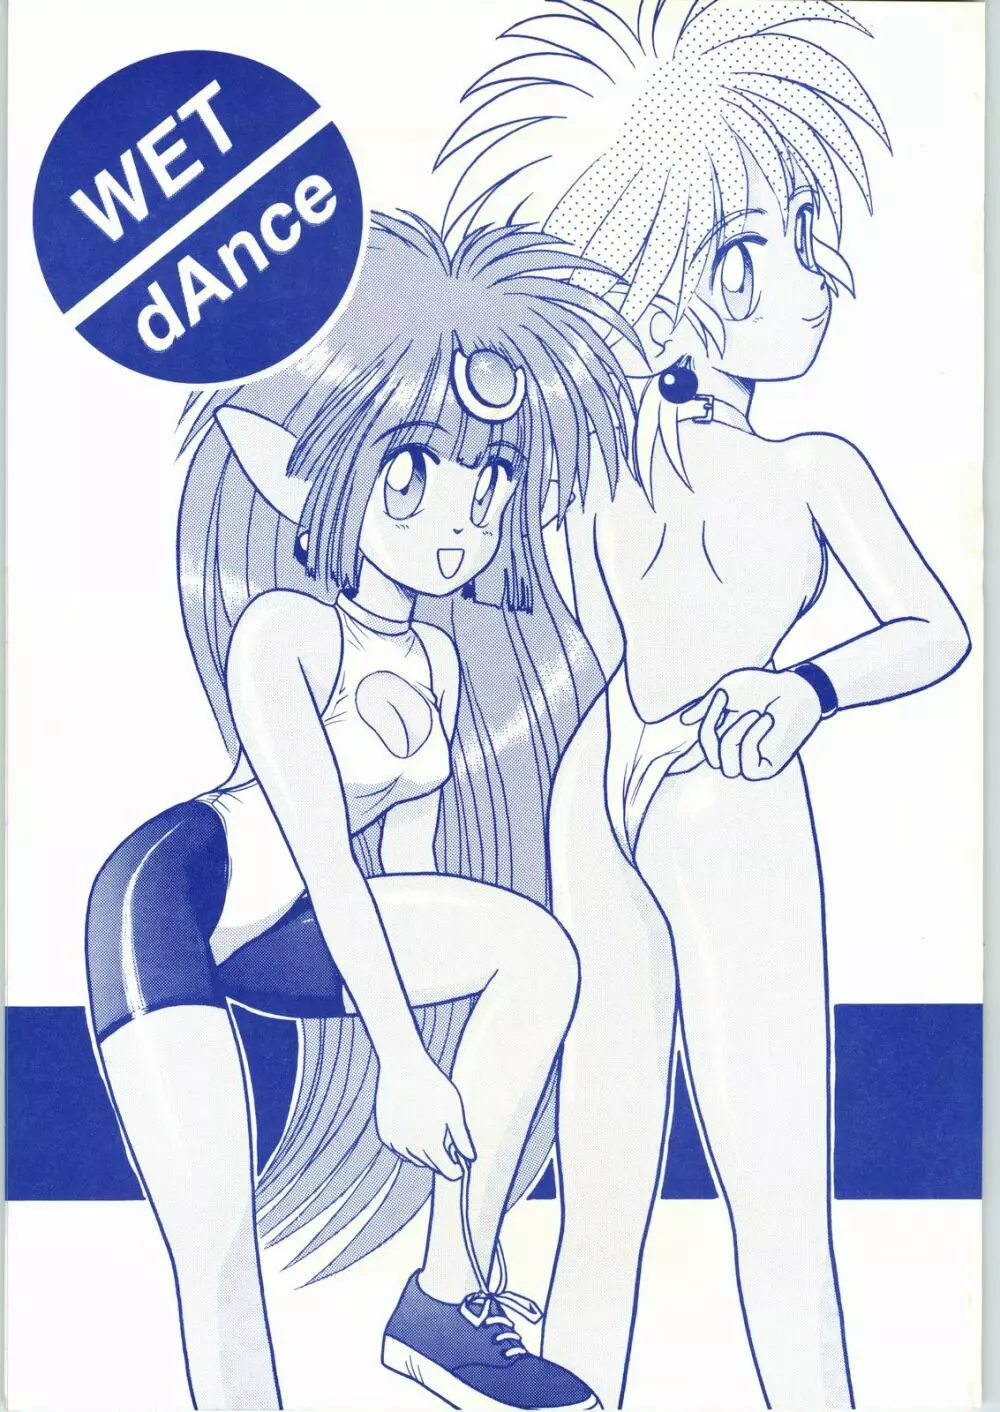 WET DANCE - page1